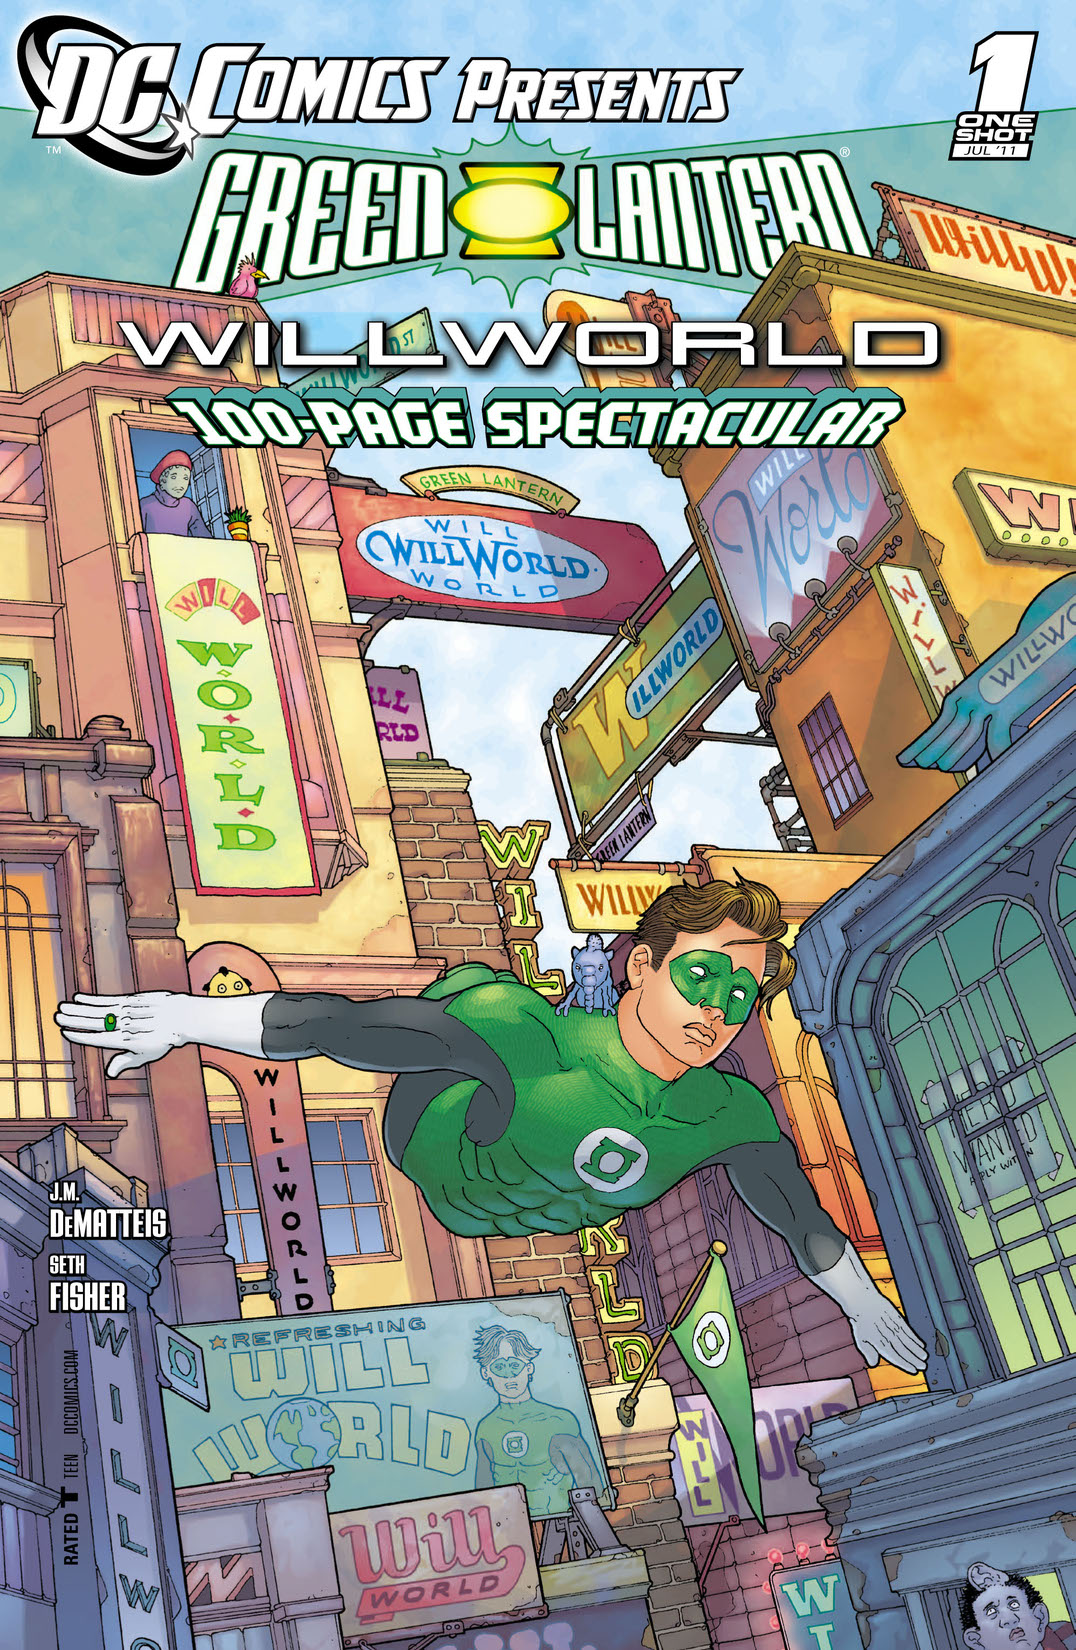 DC Comics Presents: Green Lantern, Willworld (2011-) #1 preview images